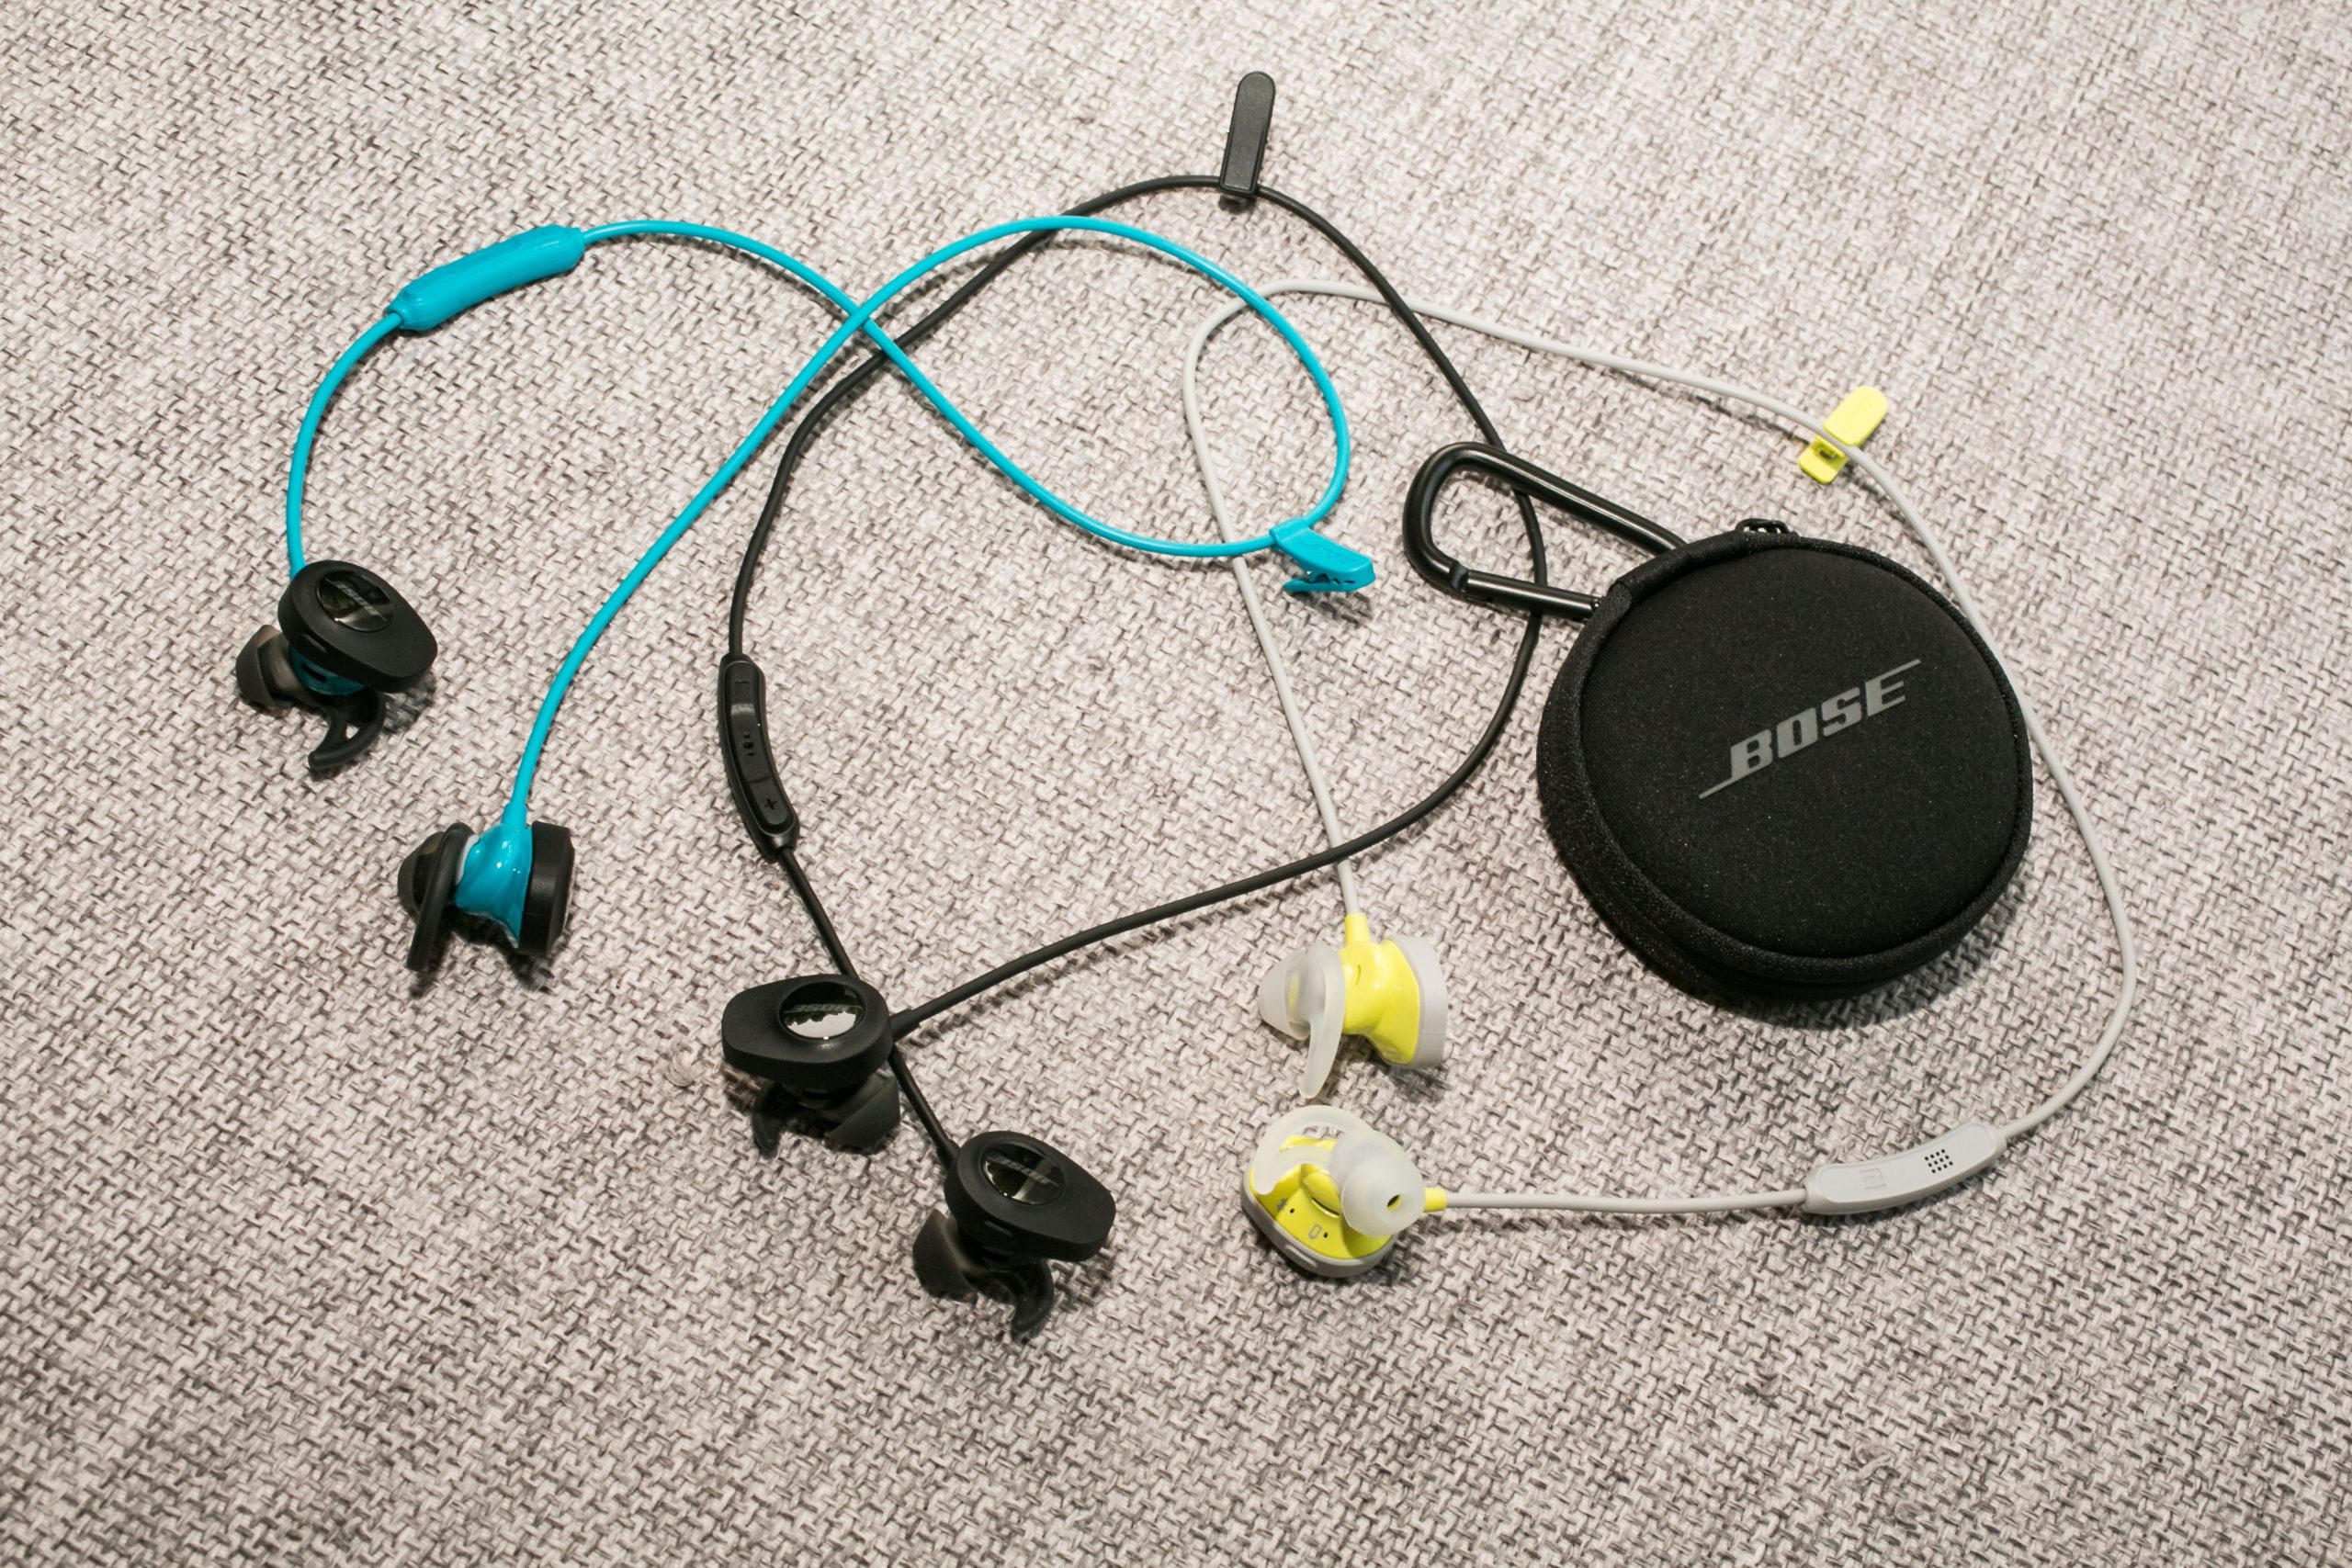 Workout Headphones You Actually Want